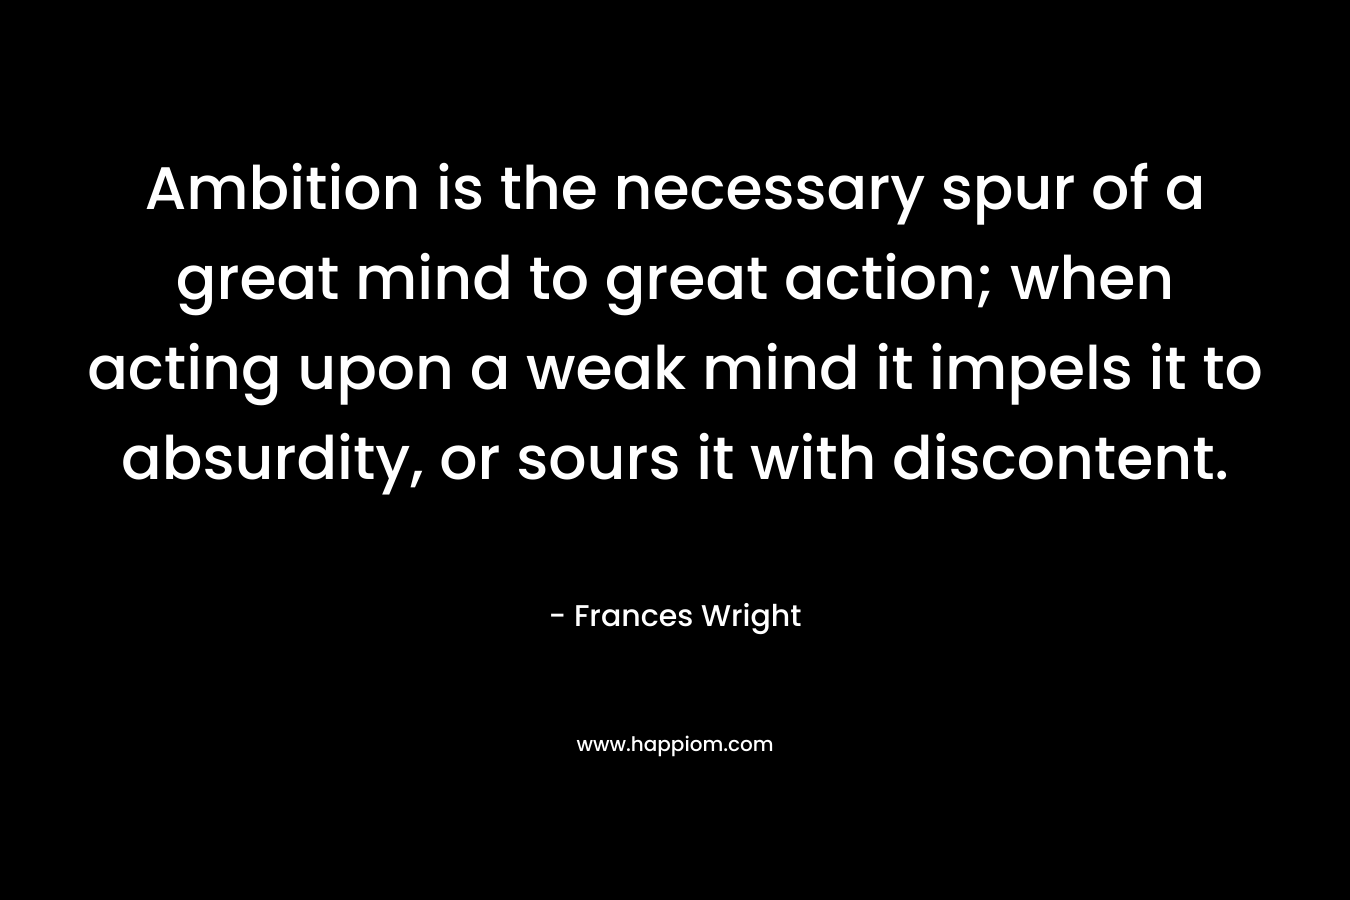 Ambition is the necessary spur of a great mind to great action; when acting upon a weak mind it impels it to absurdity, or sours it with discontent. – Frances Wright